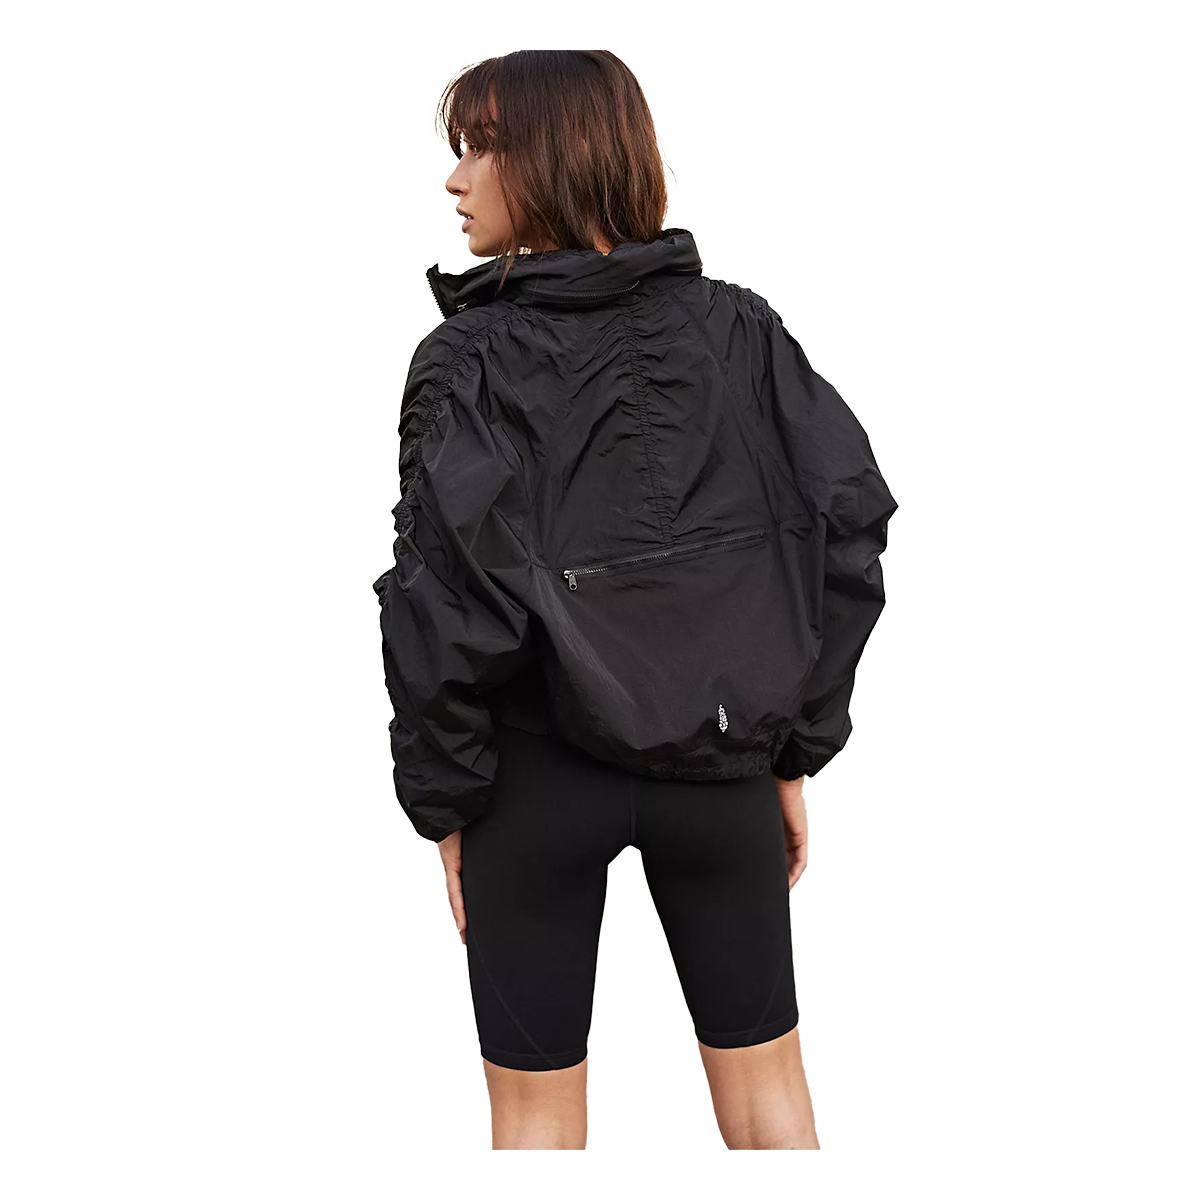 FP Movement Way Home Packable Jacket